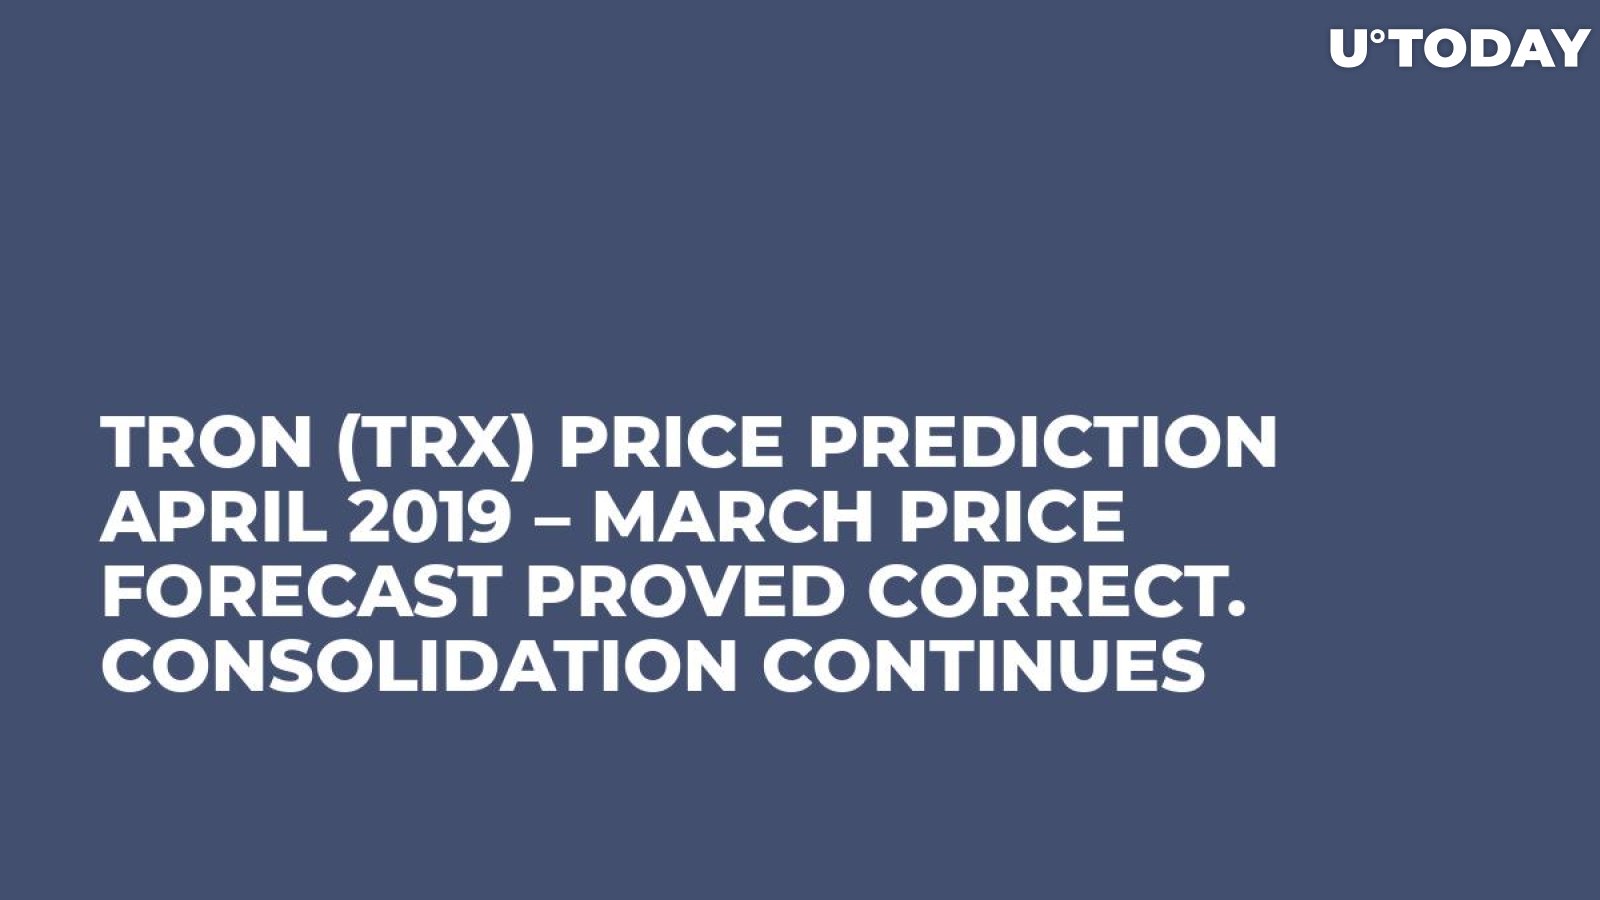 Tron (TRX) Price Prediction April 2019 – March Price Forecast Proved Correct. Consolidation Continues